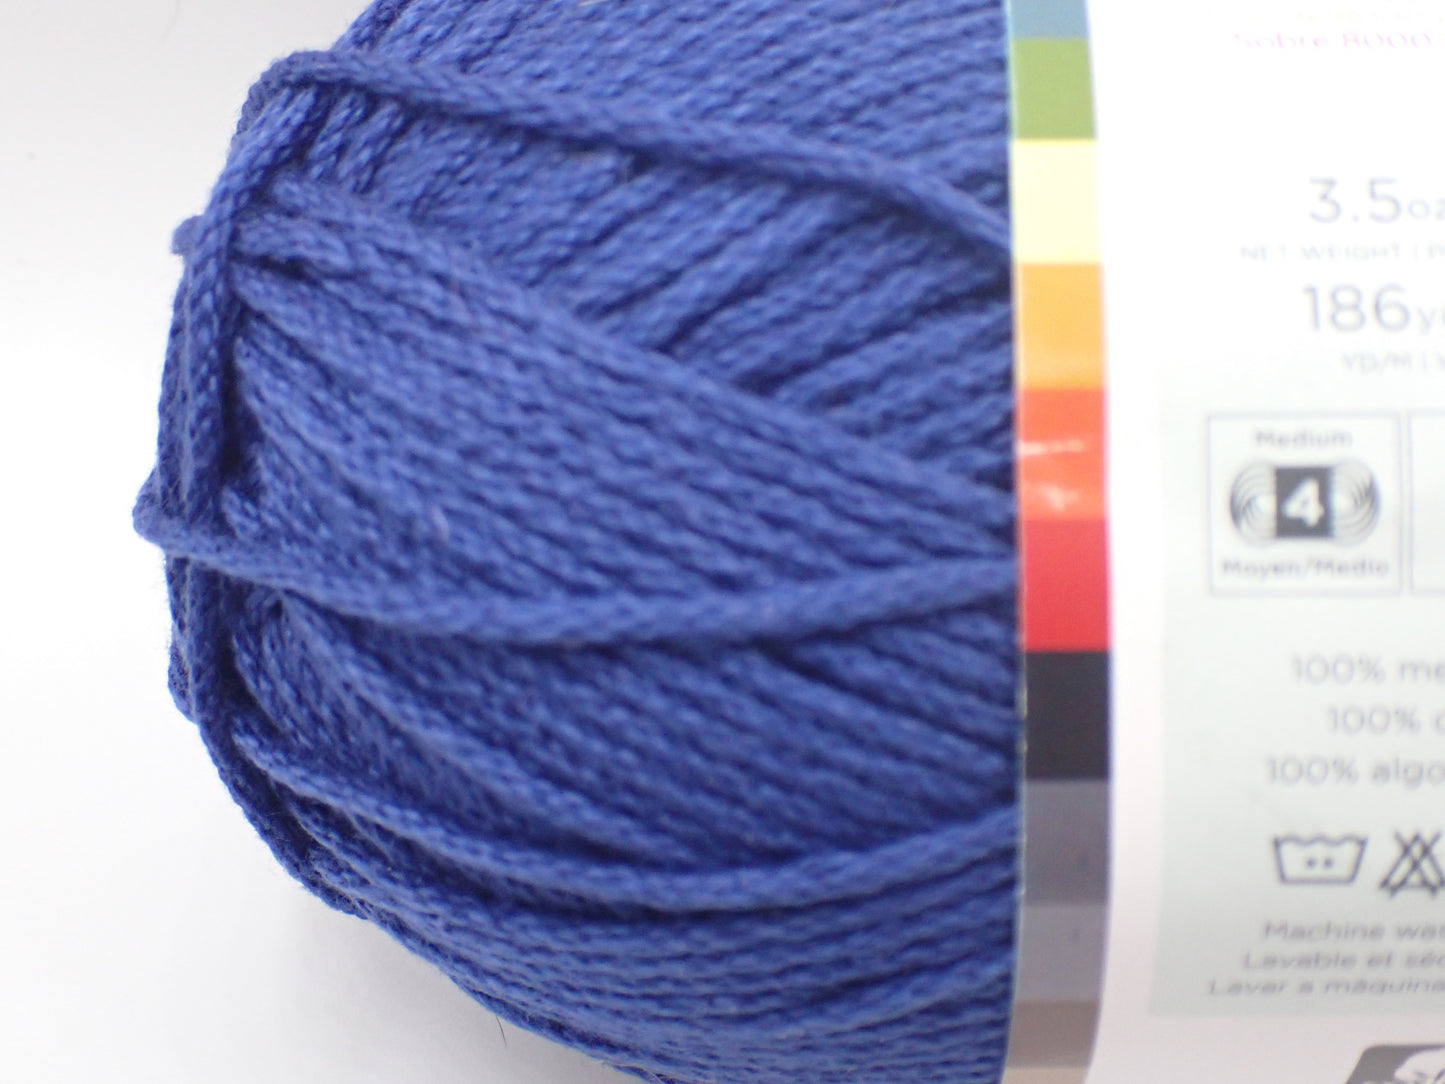 Lion Brand Yarns Worsted weight 24/7 Cotton Yarn Navy